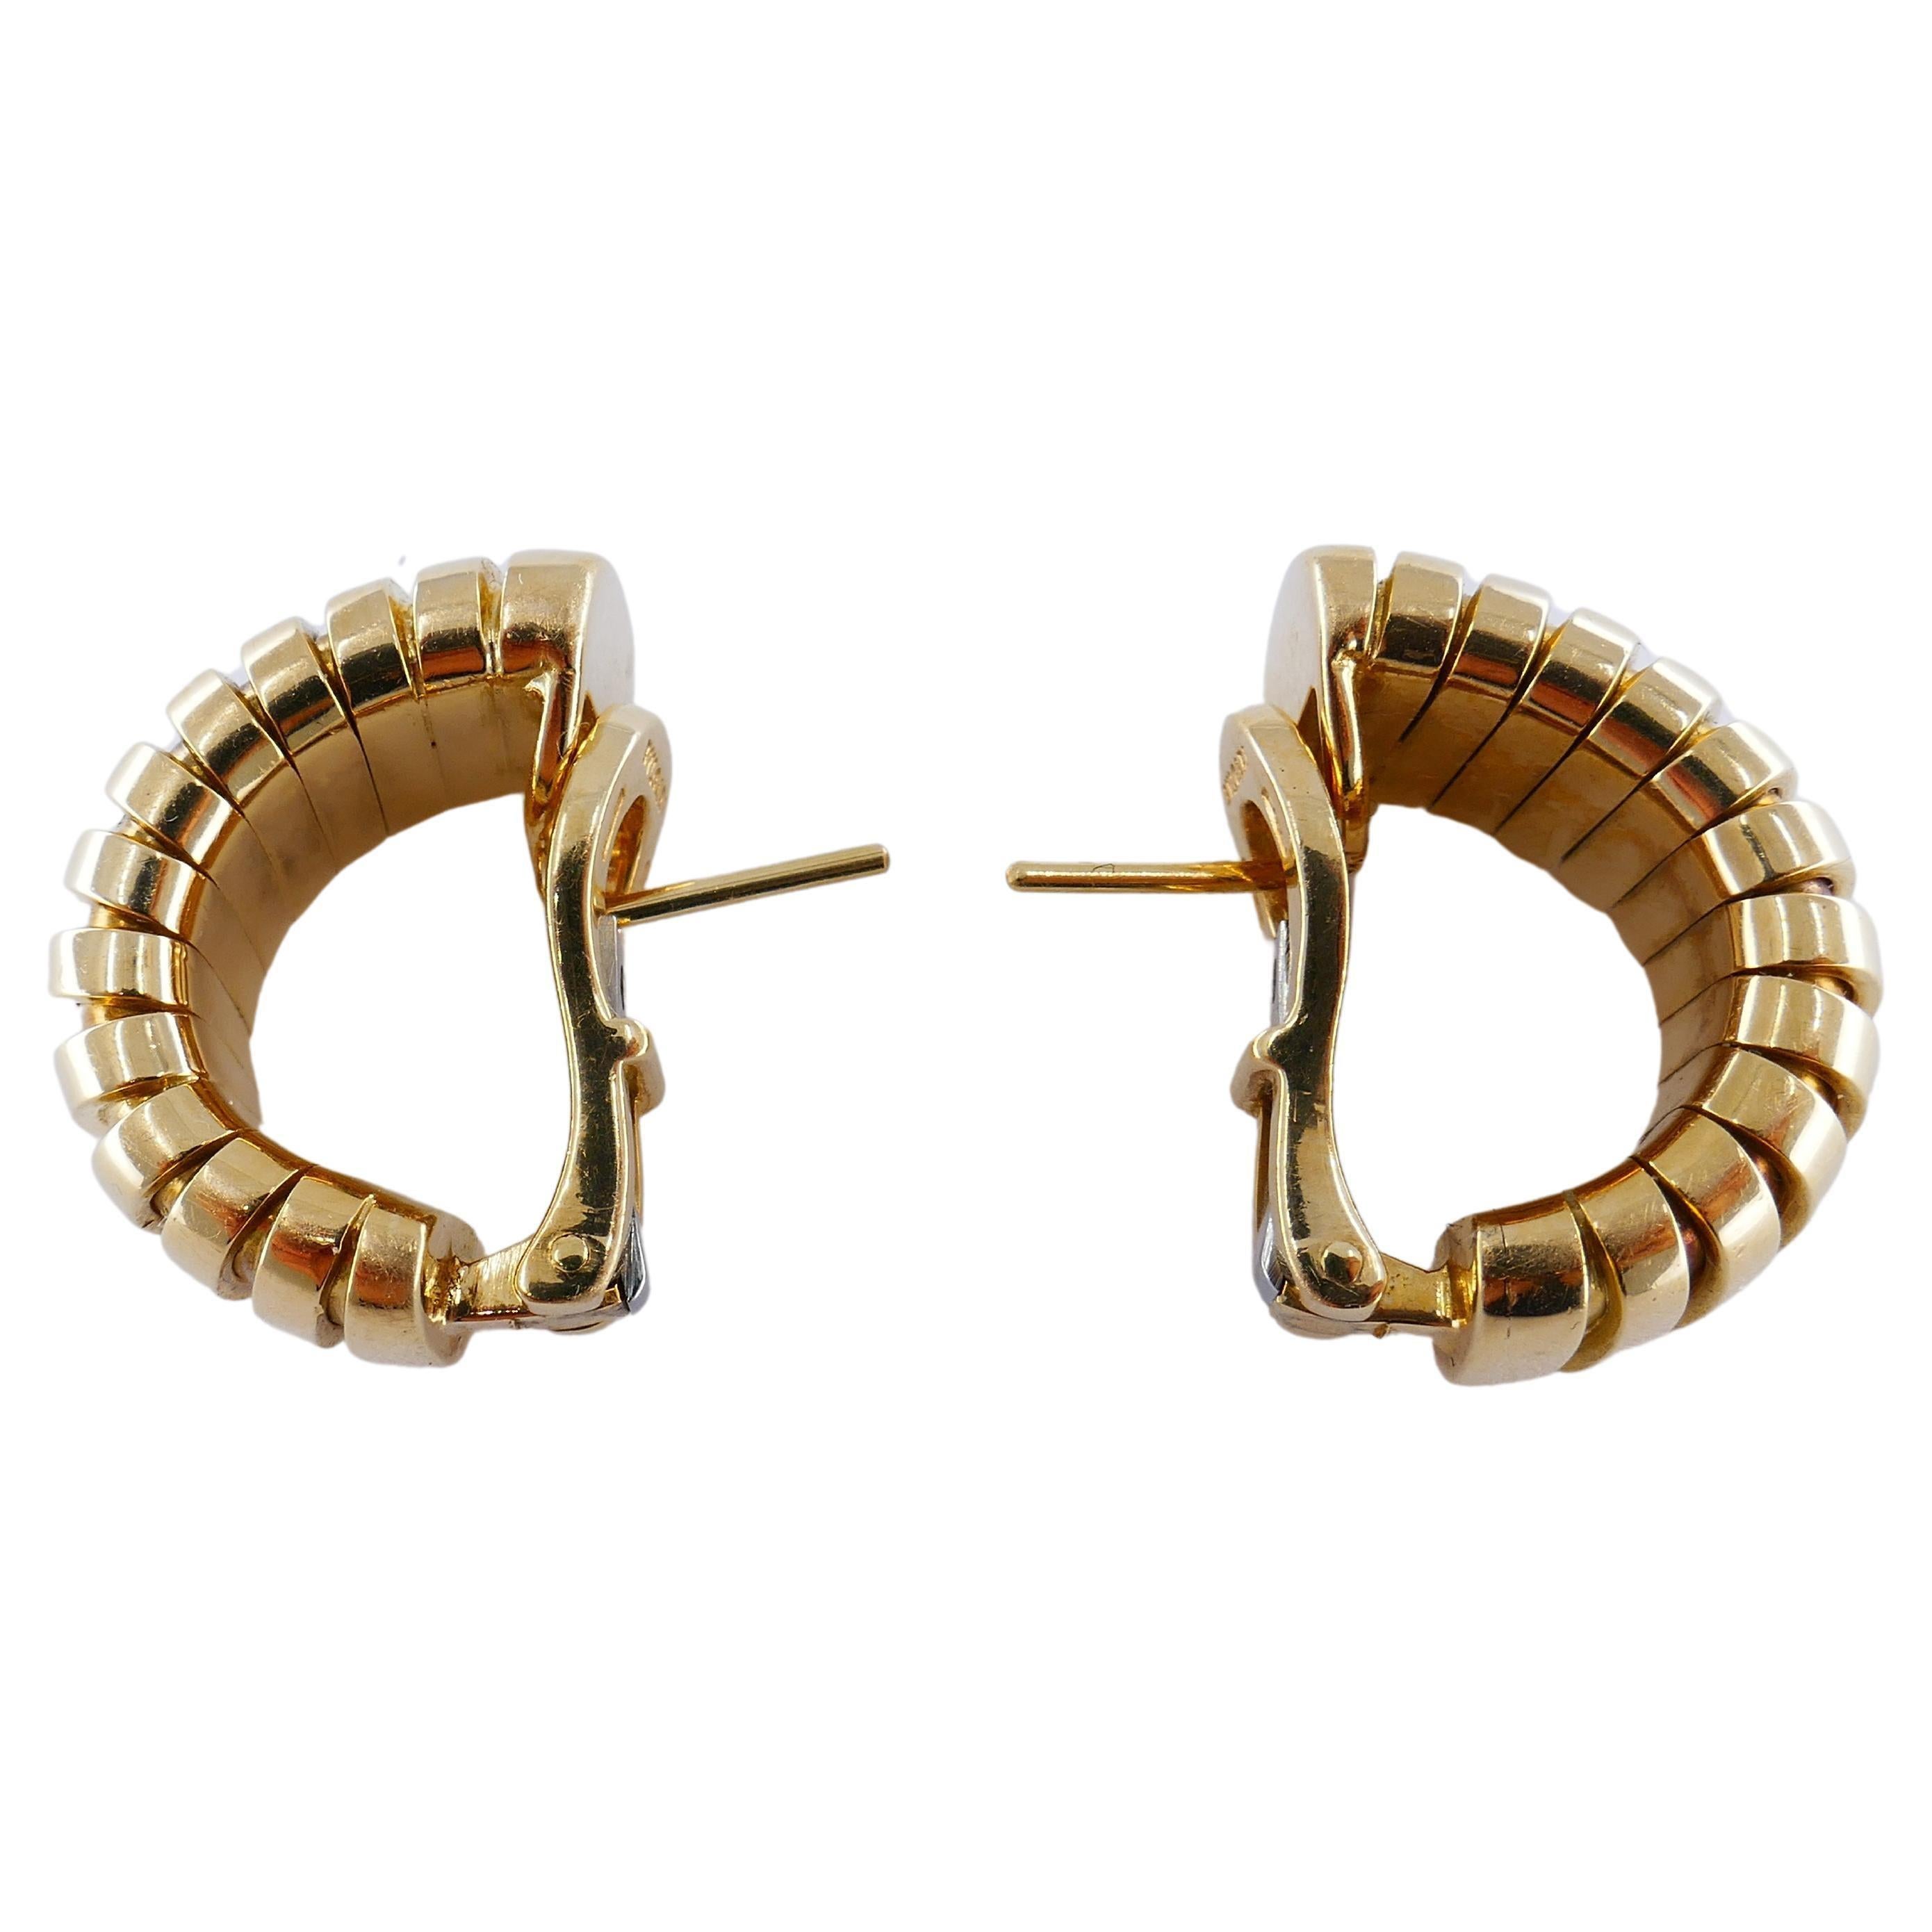 Vintage Bulgari Tubogas Earrings In Excellent Condition For Sale In Beverly Hills, CA